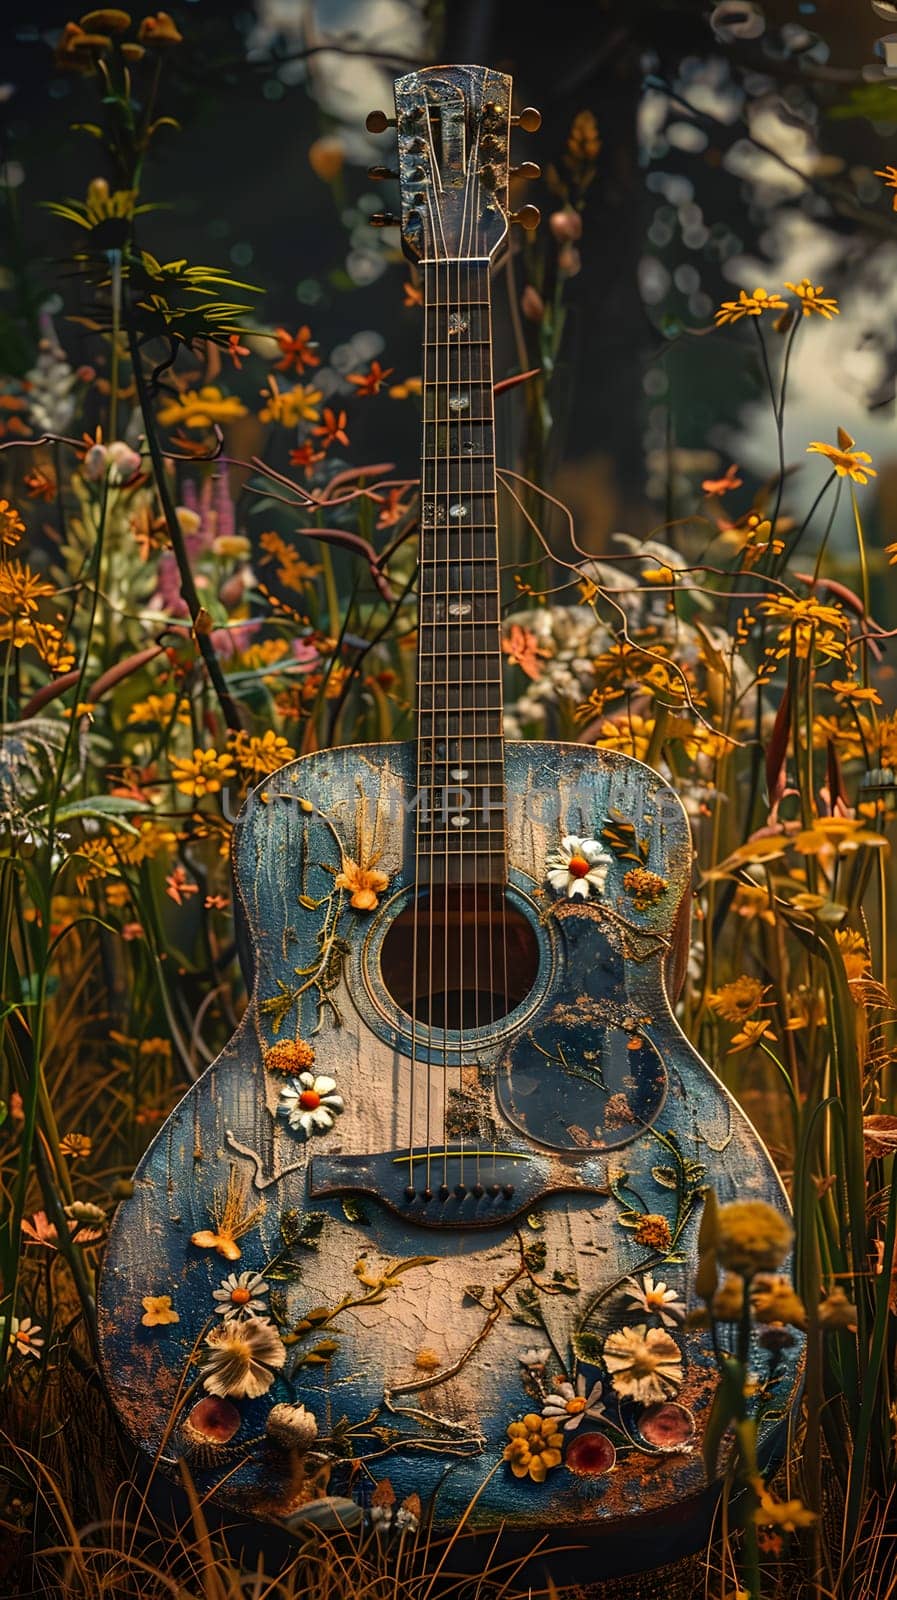 An acoustic guitar is placed in a field surrounded by colorful flowers, contrasting with the urban landscape of skyscrapers and tower blocks in the background